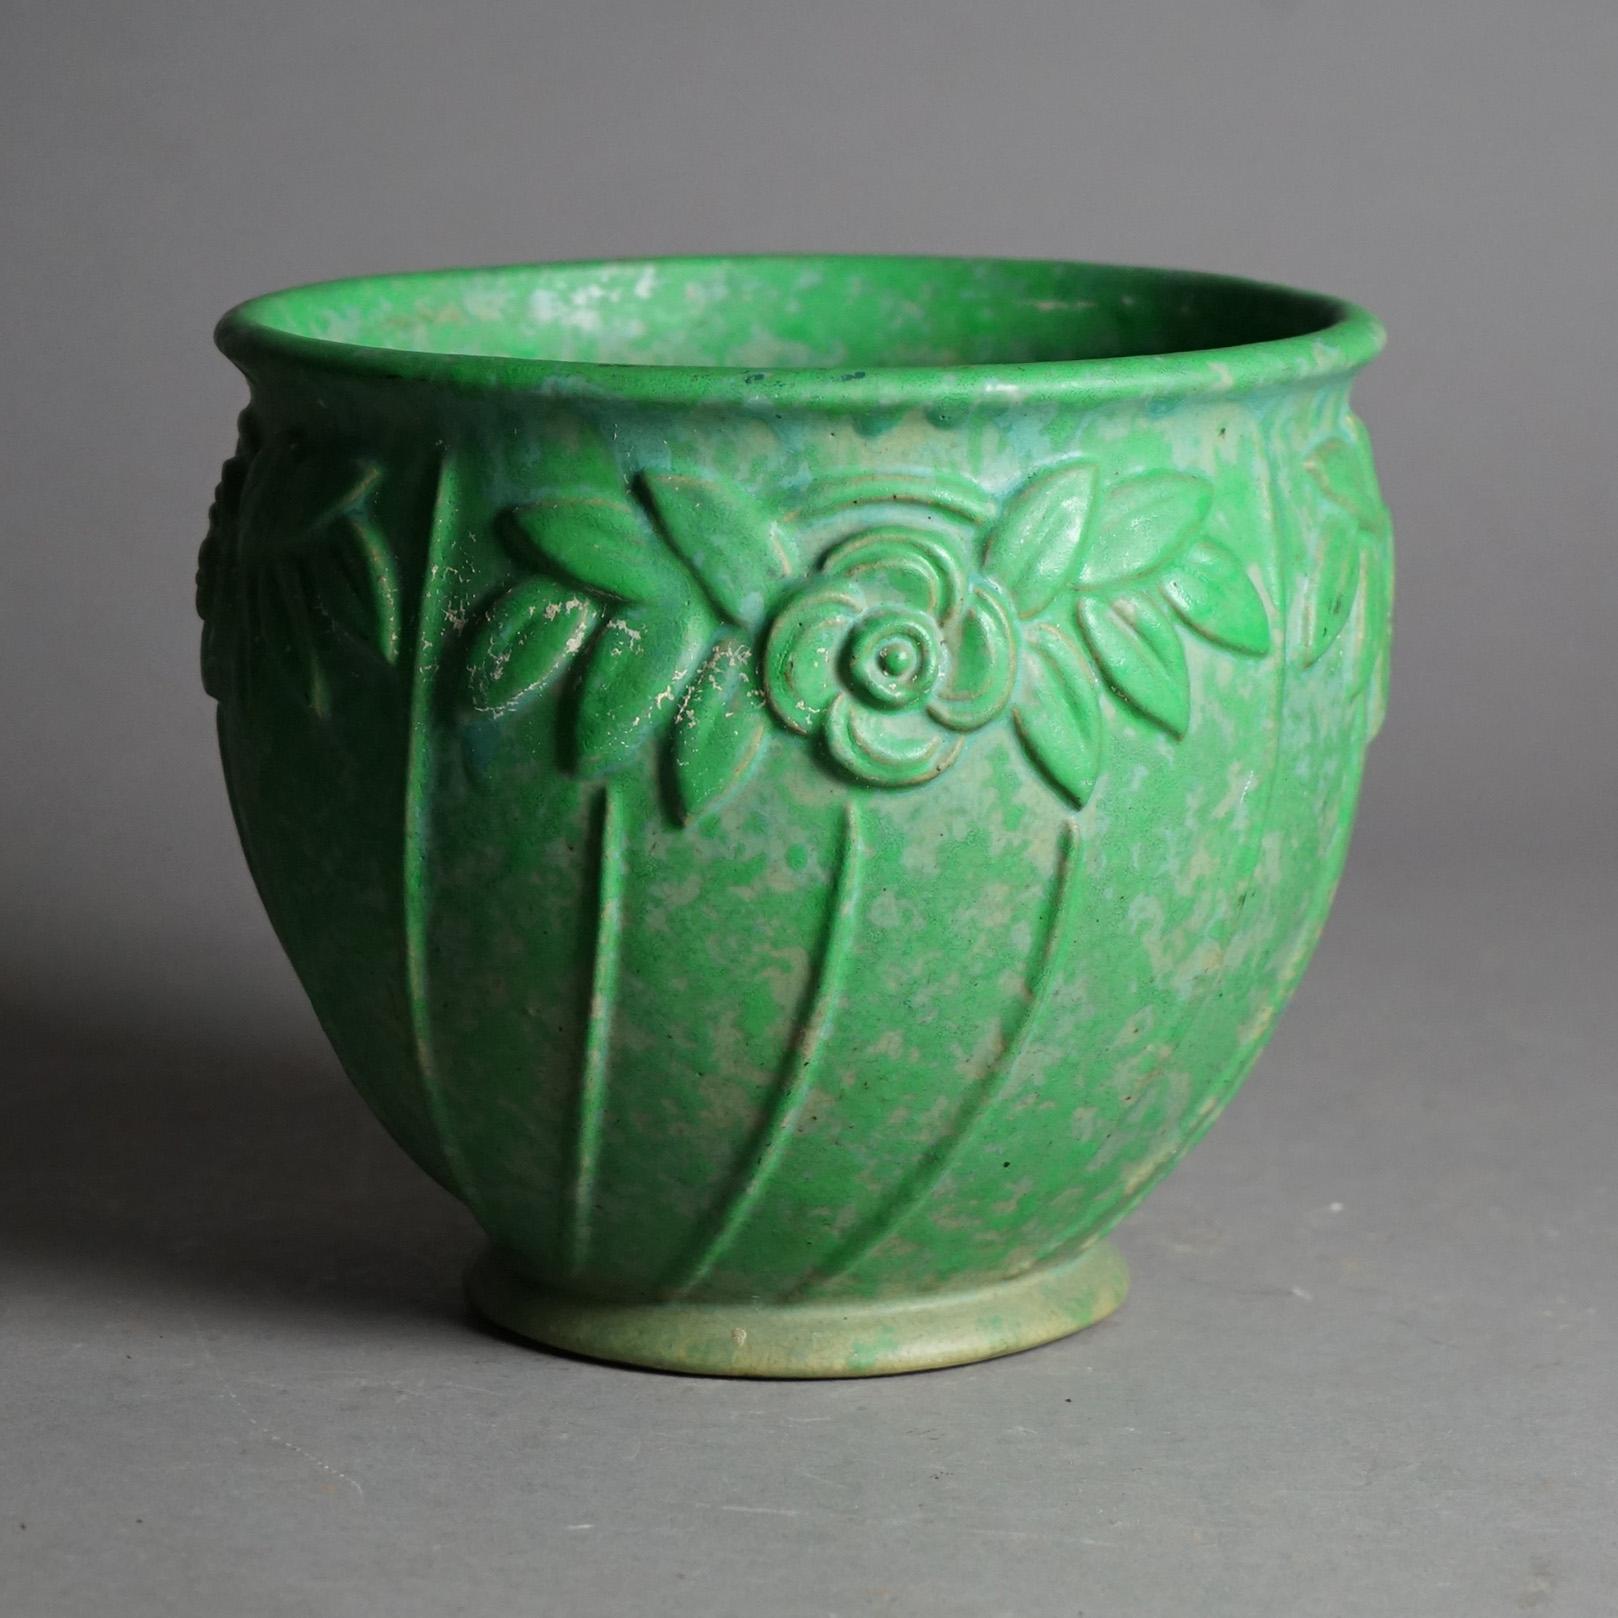 An antique Arts and Crafts jardiniere by Weller offers glazed art pottery construction with embossed flower patter, c1920

Measures - 7.75